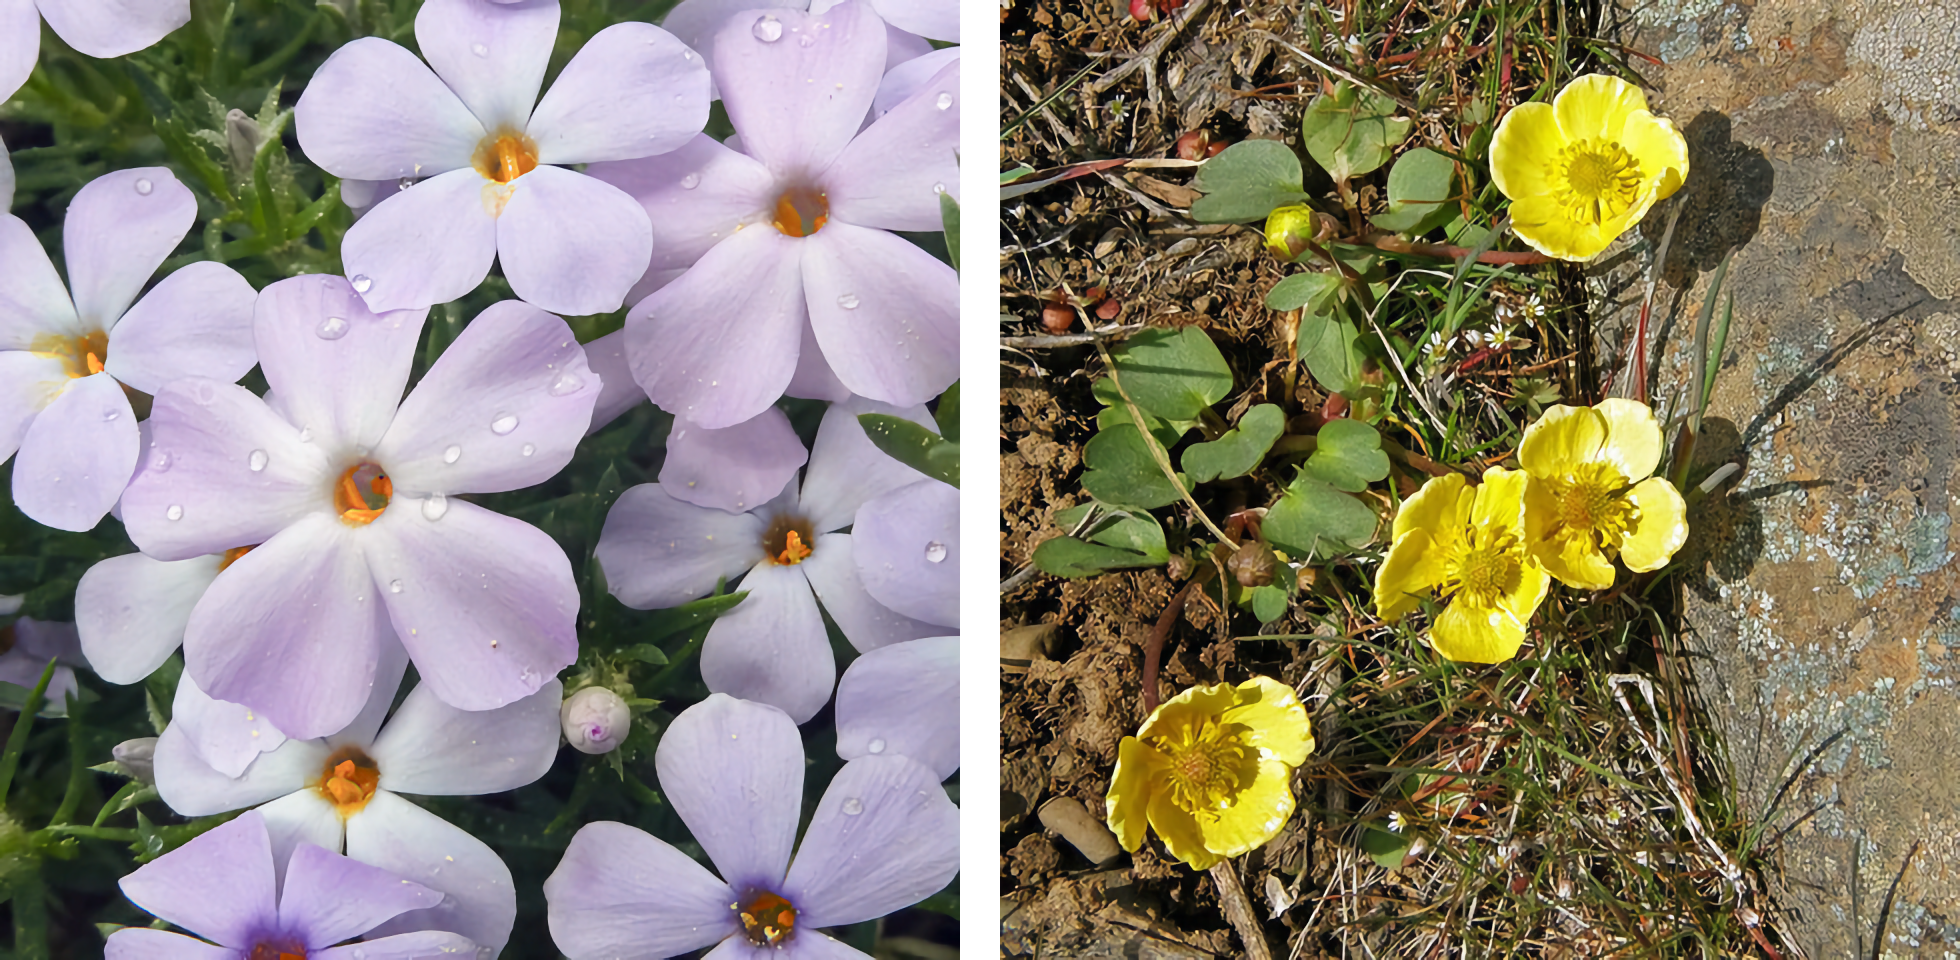 Two-photo montage, with close-up of 5- petaled purple flowers on left, and 4 small 4-petaled yellow flowers on right.